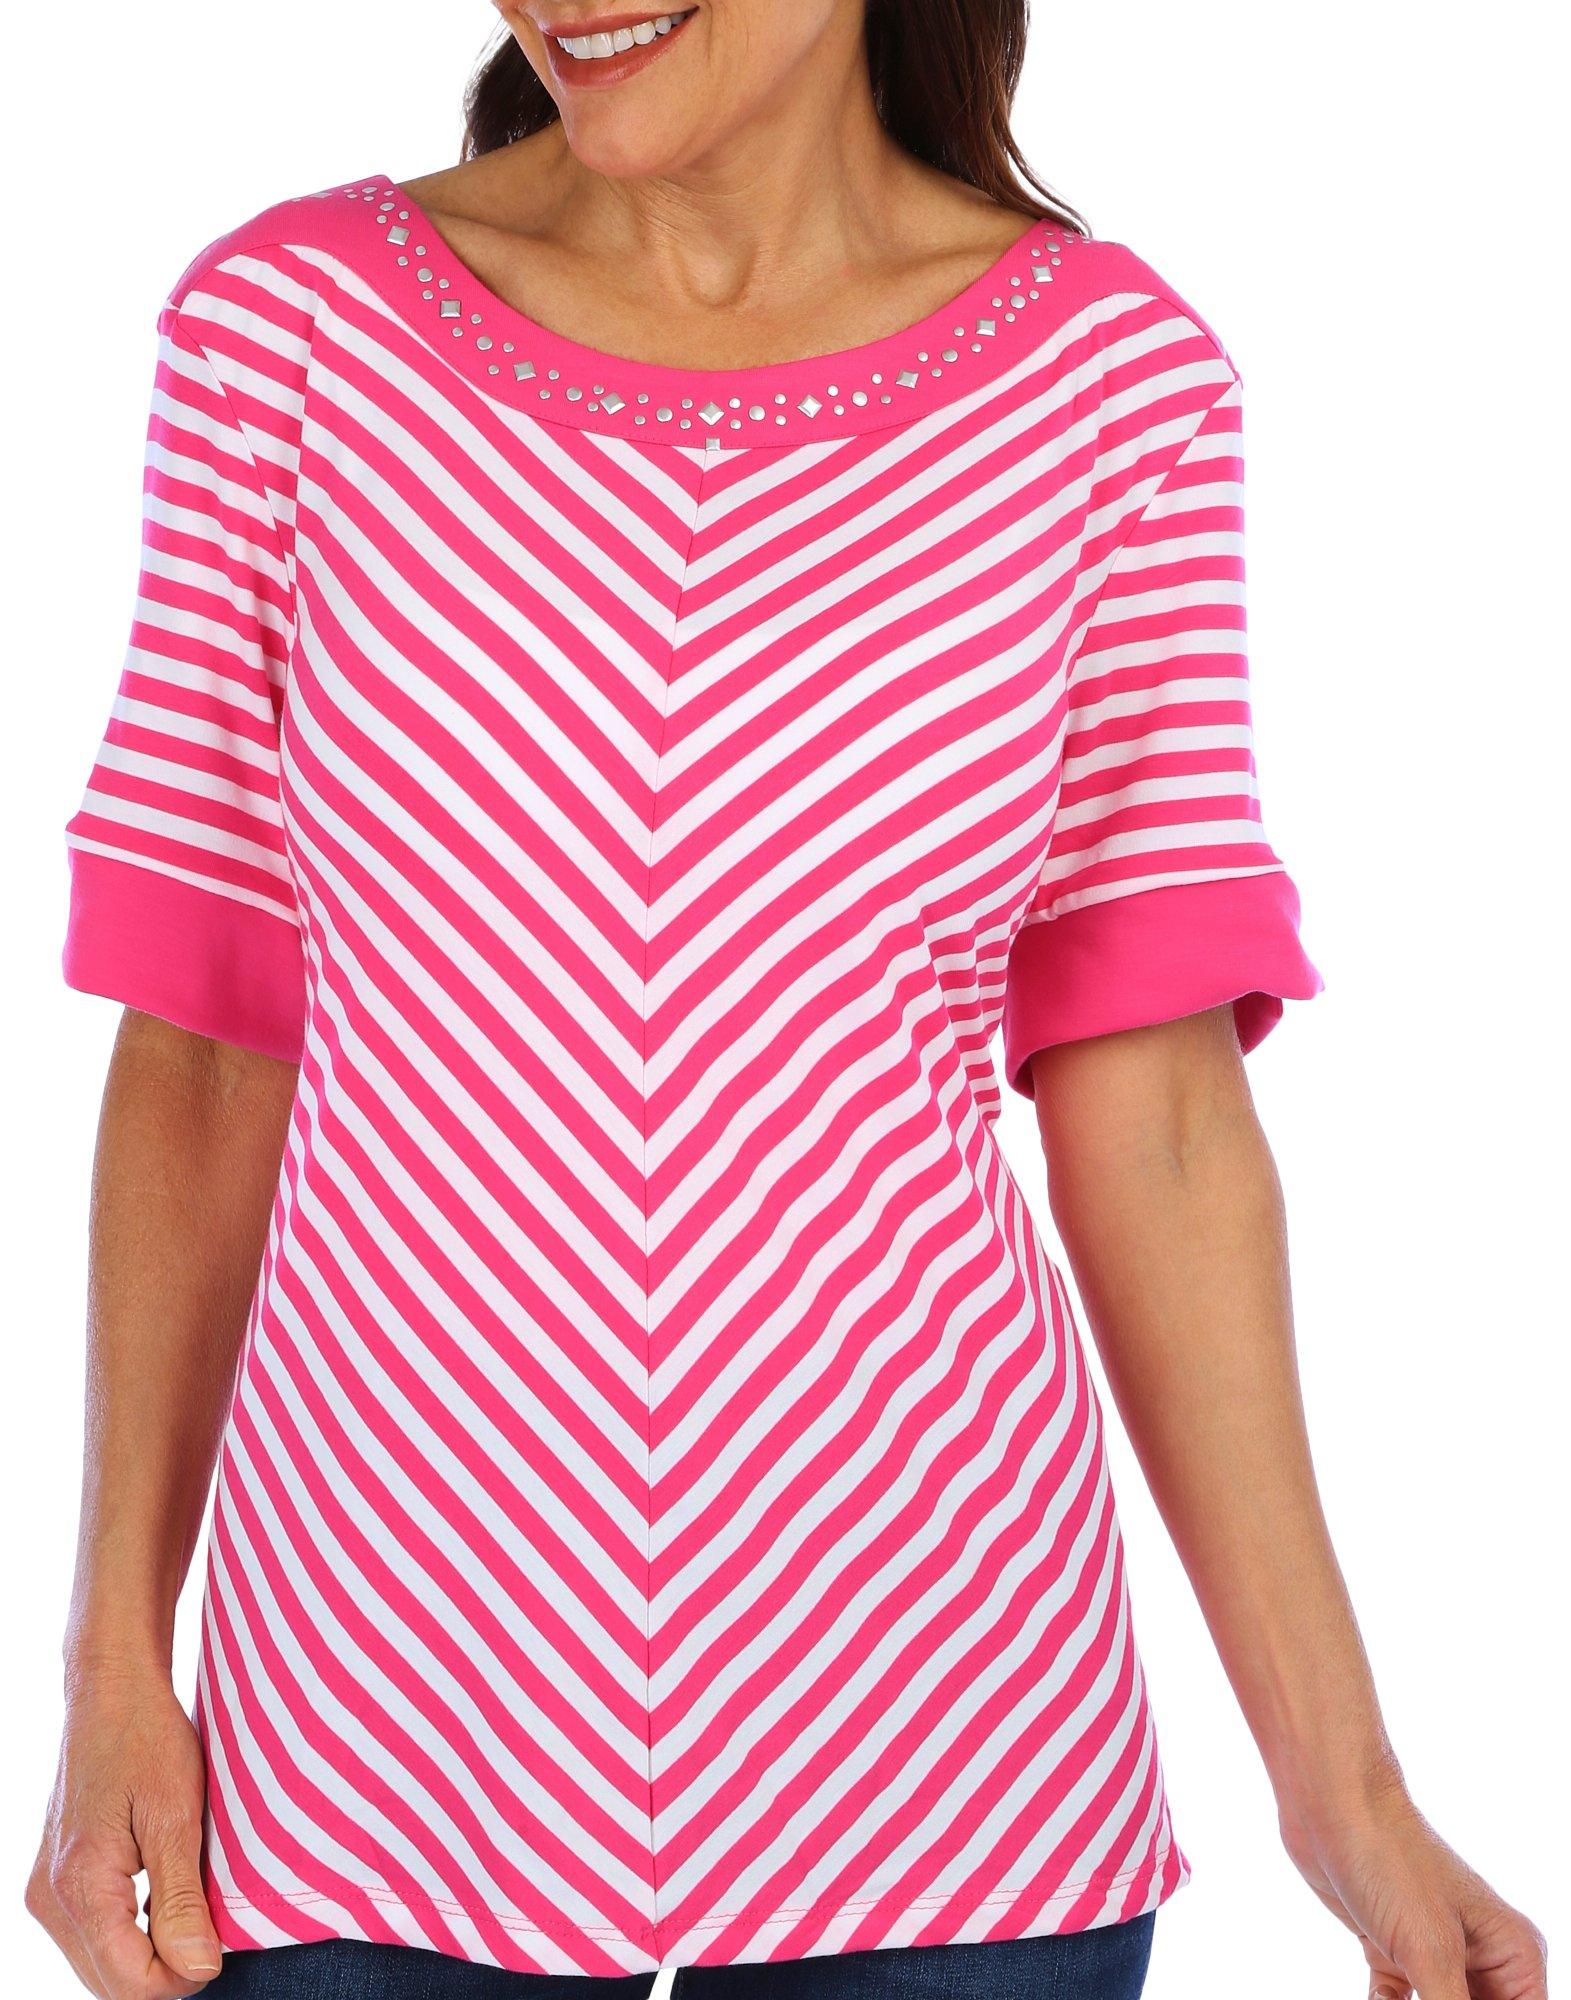 Womens Embellished Striped Short Sleeve Top